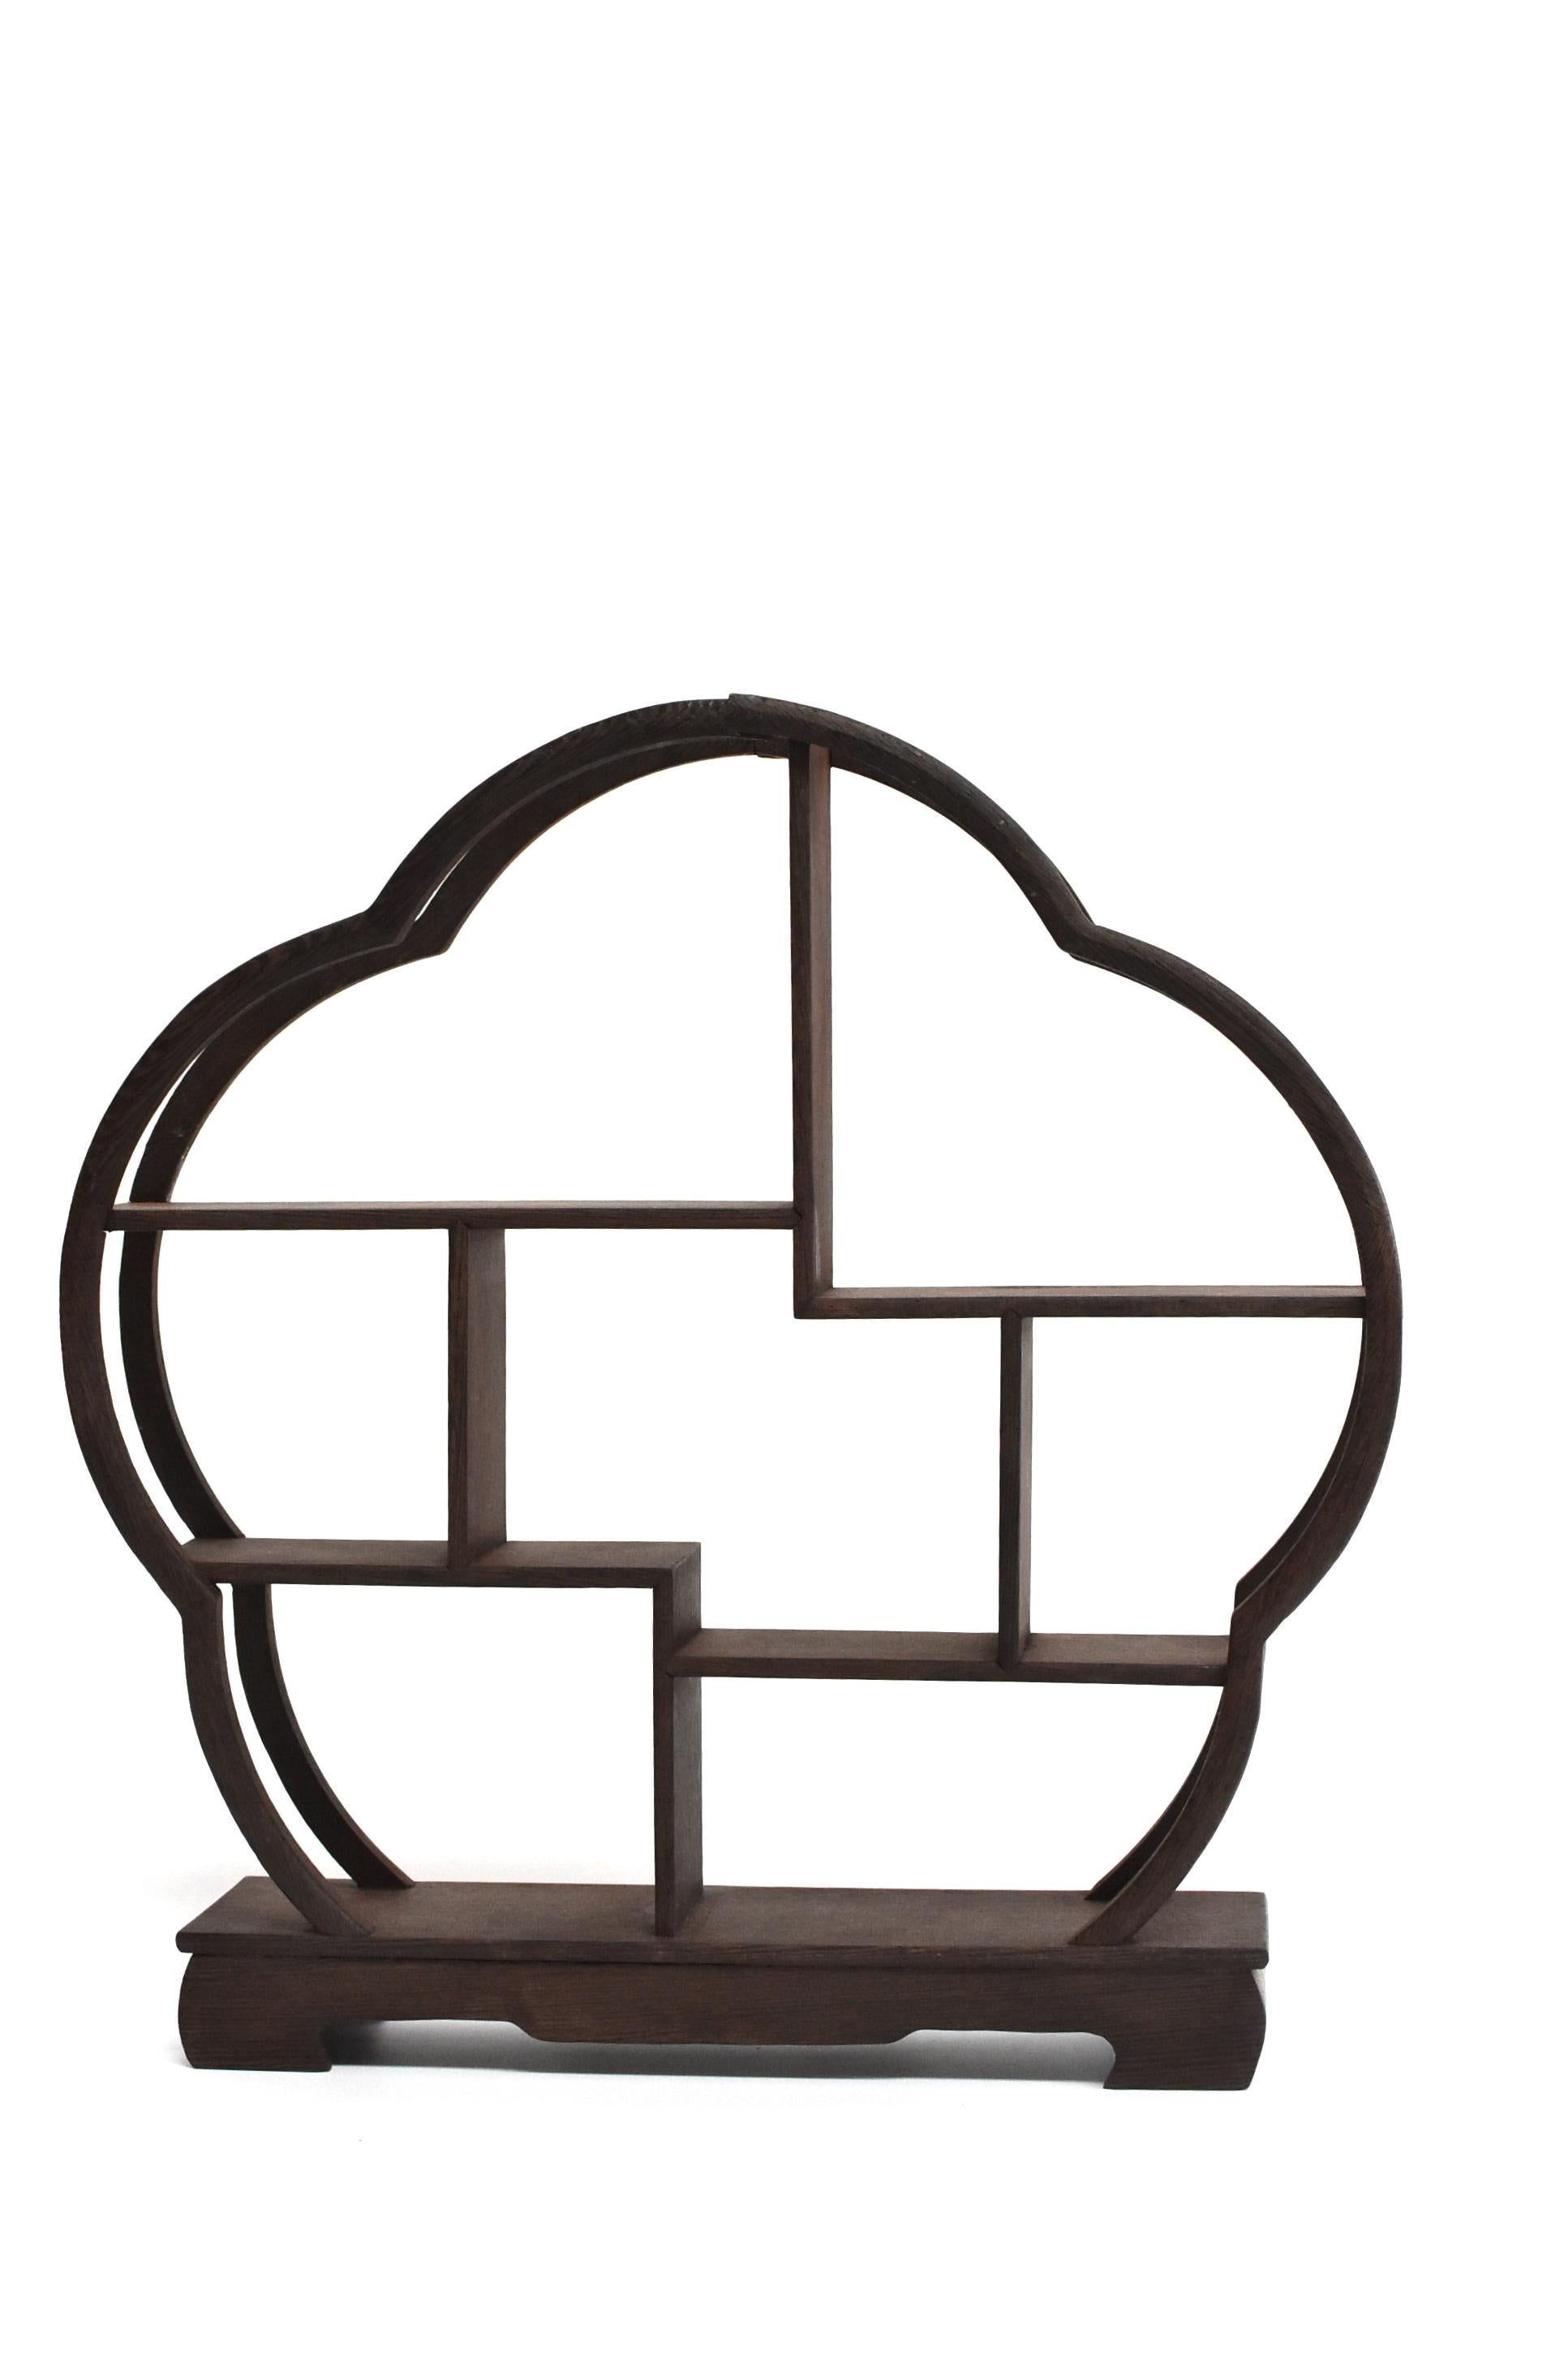 A fine ji-chi-mu solid wenge wood stand for display of your miniature collections. Beautiful, elegant begonia shape. There are eight spaces of various heights and sizes to suit your little treasures. The wood is beautiful with distinctive swirls and